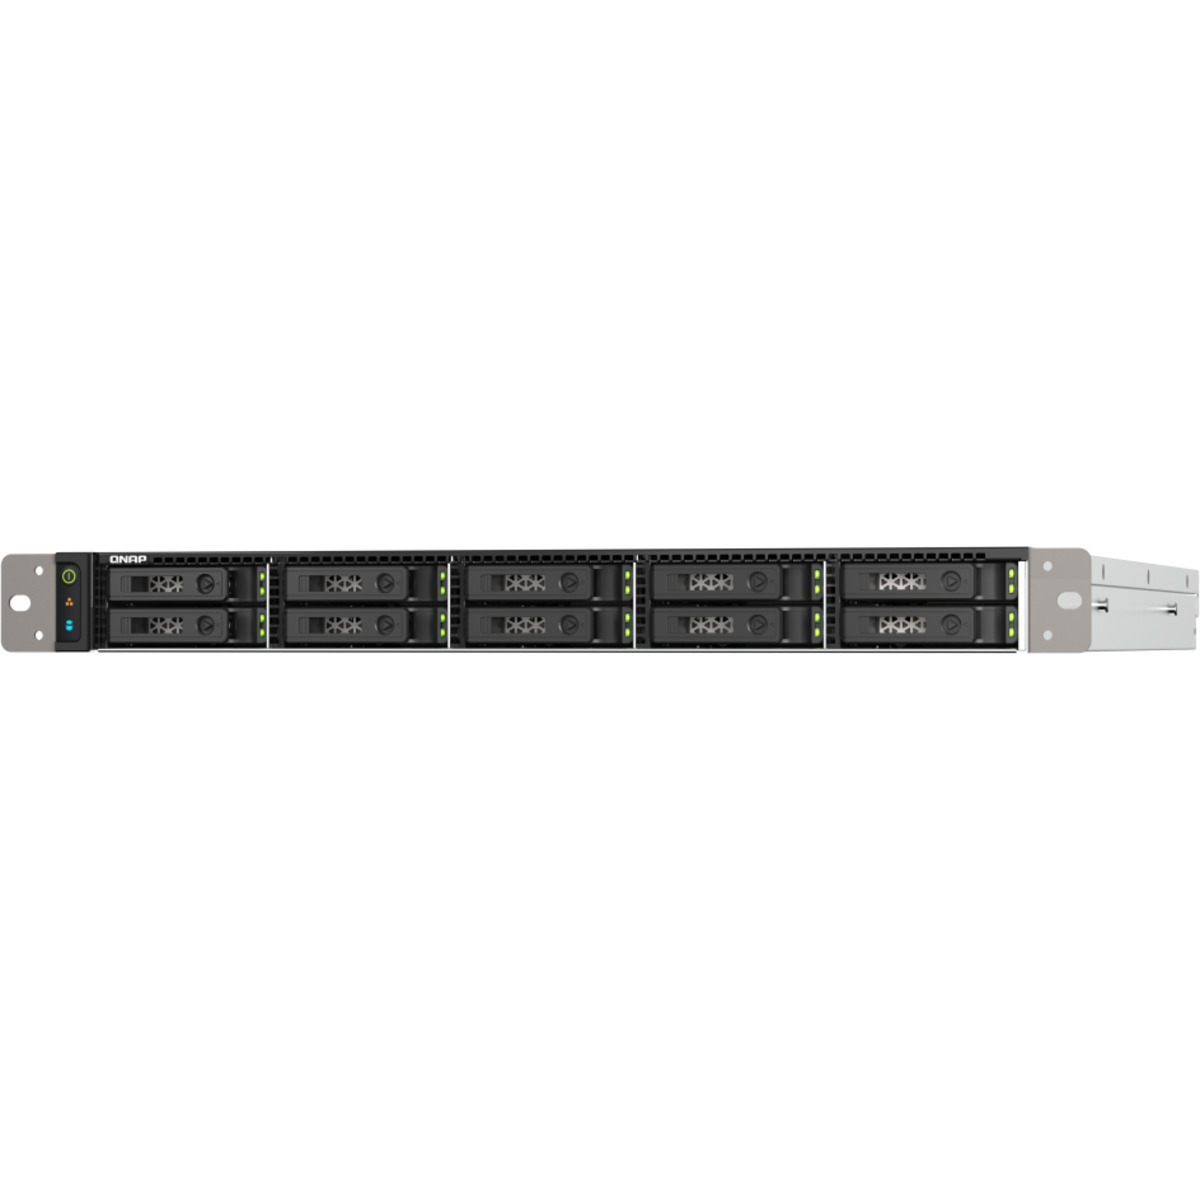 QNAP TS-h1090FU-7302P 14tb 10-Bay RackMount Large Business / Enterprise NAS - Network Attached Storage Device 7x2tb Western Digital Red SN700 WDS200T1R0C  3400/2900MB/s M.2 2280 NVMe SSD NAS Class Drives Installed - Burn-In Tested TS-h1090FU-7302P